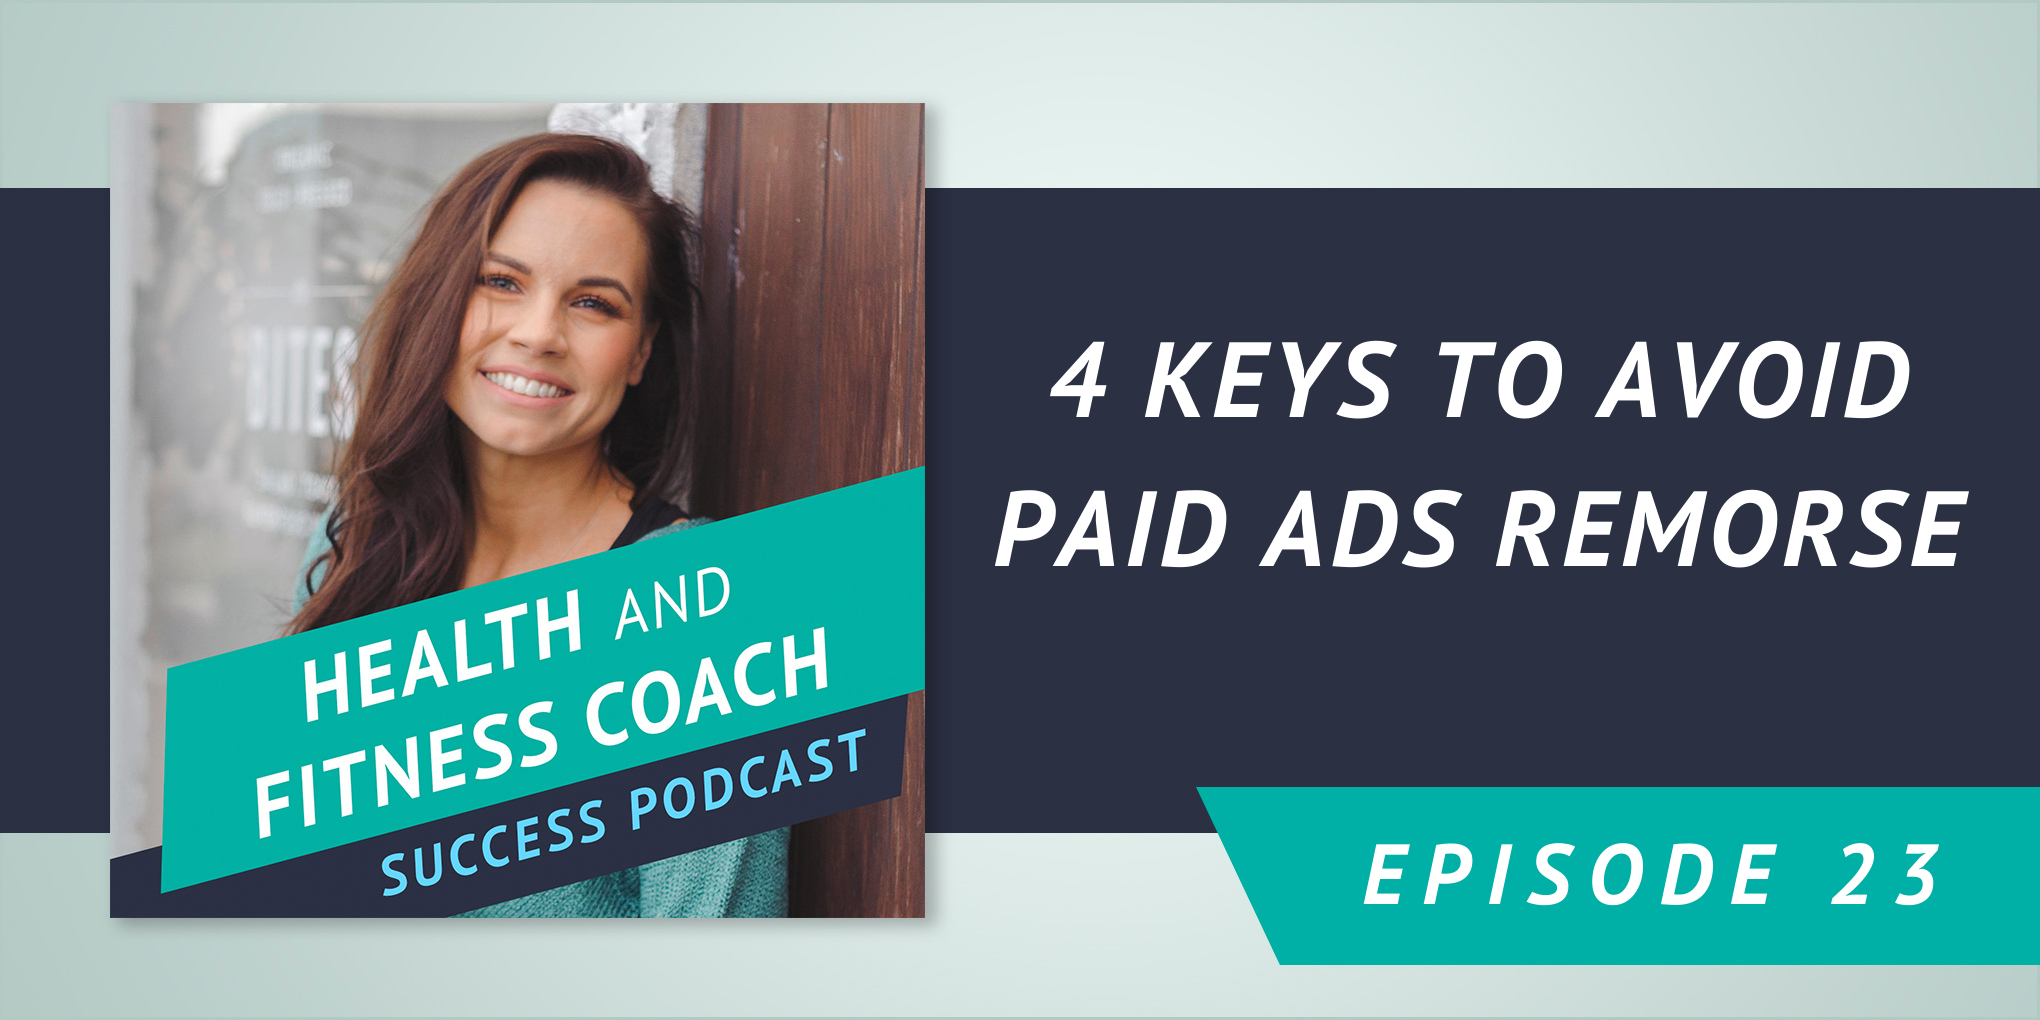 4 Keys to Avoid Paid Ads Remorse